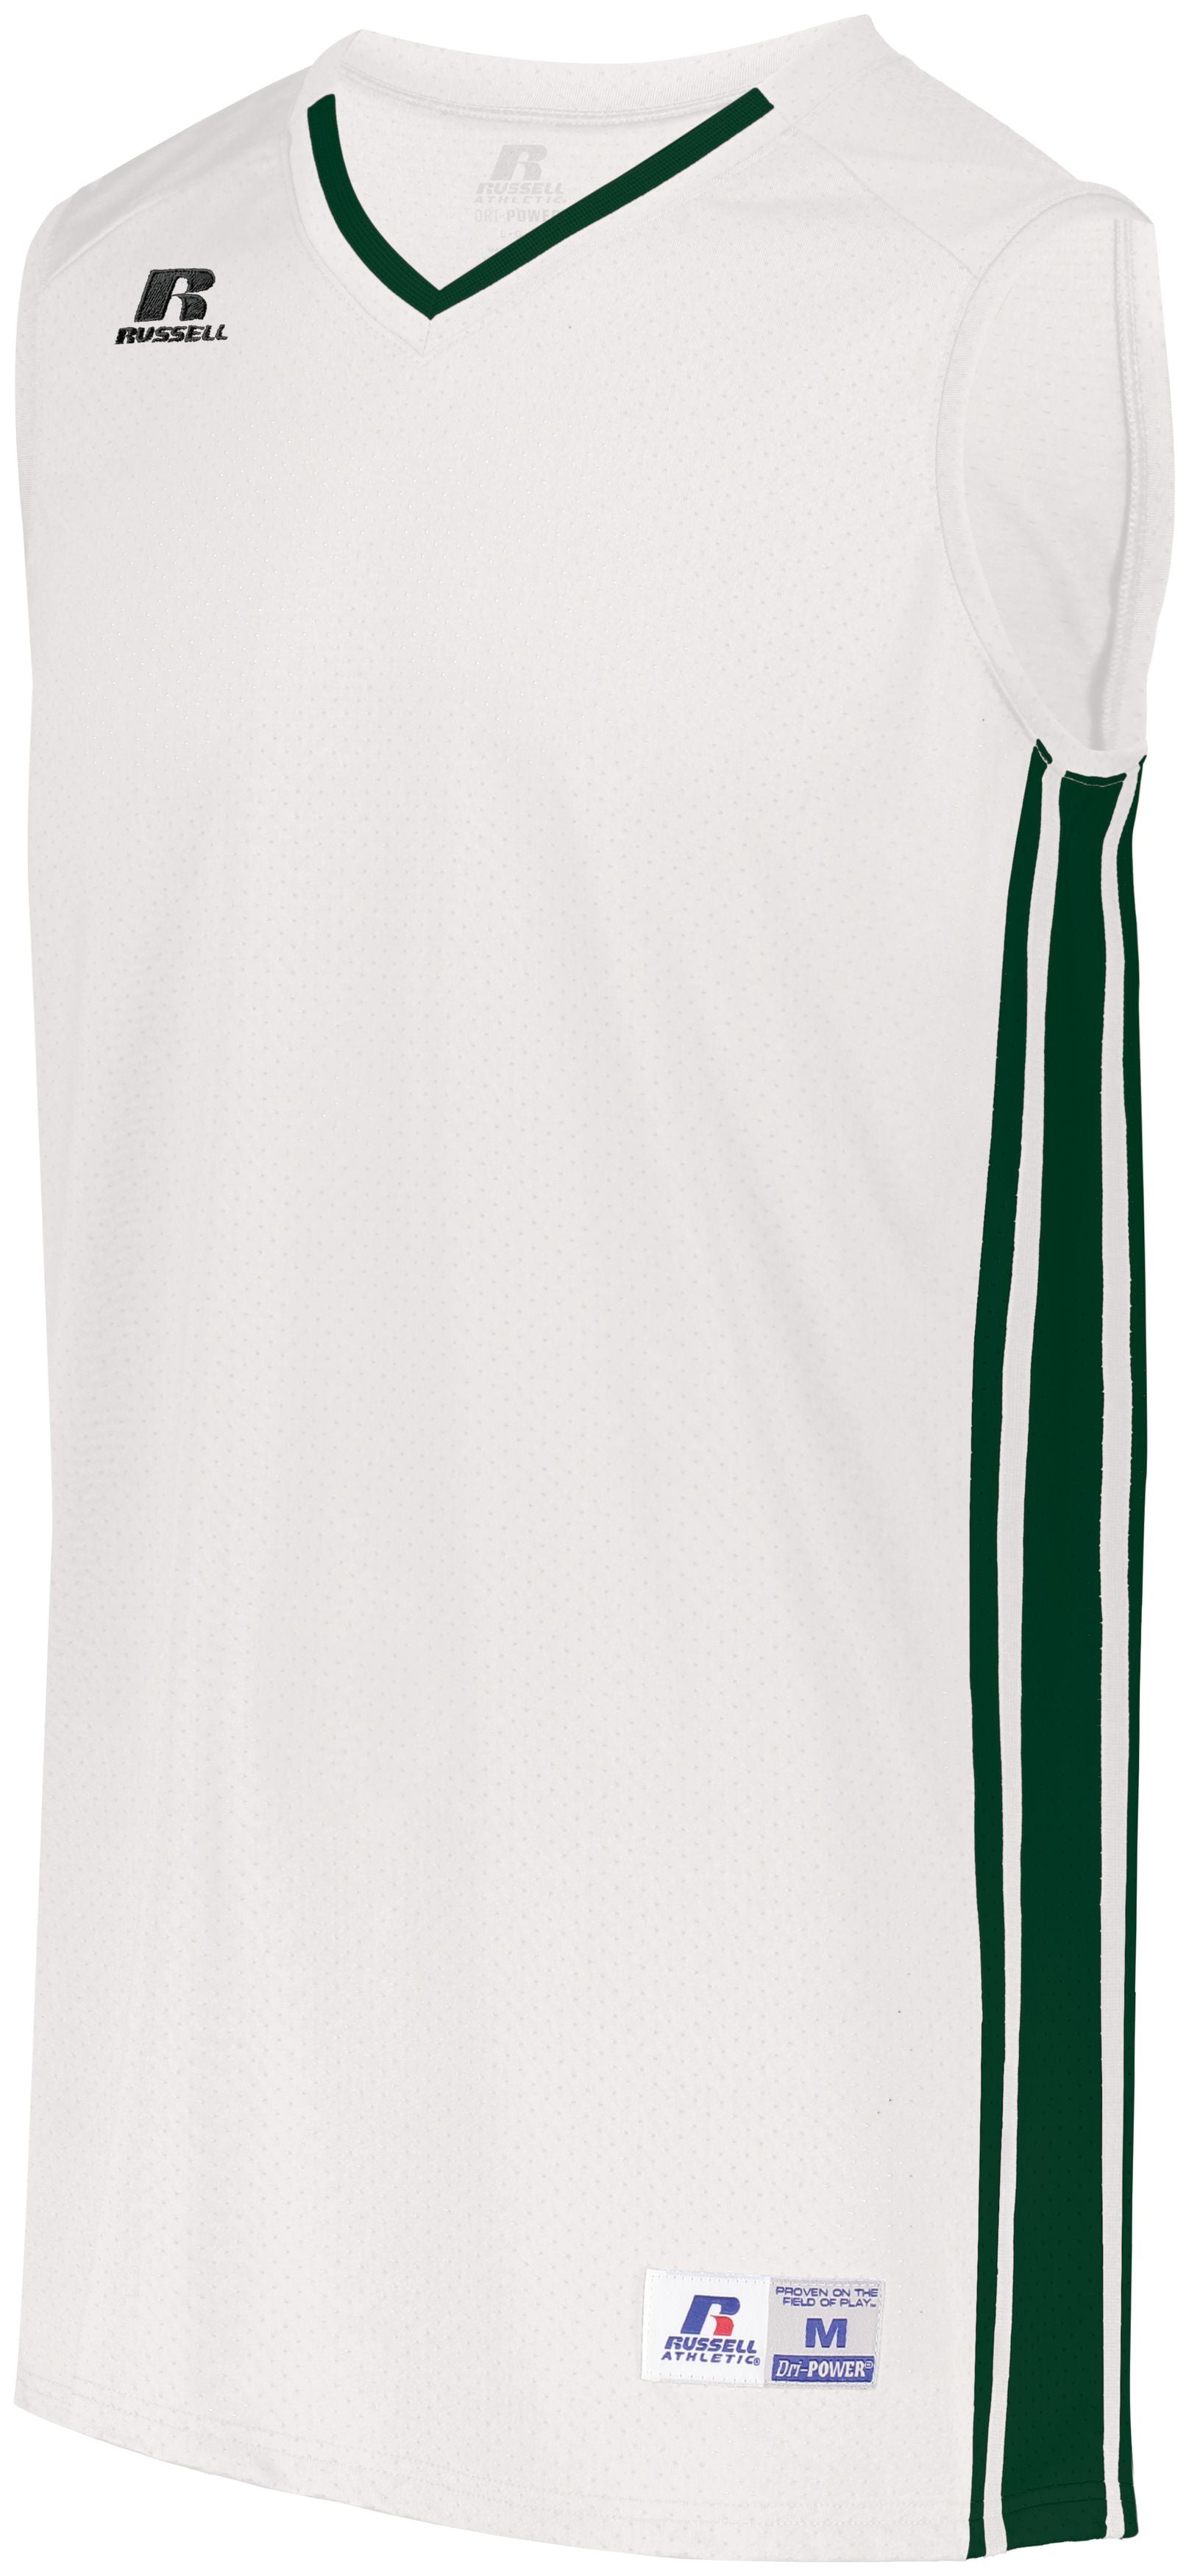 Russell Athletic Youth Legacy Basketball Jersey in White/Dark Green  -Part of the Youth, Youth-Jersey, Basketball, Russell-Athletic-Products, Shirts, All-Sports, All-Sports-1 product lines at KanaleyCreations.com